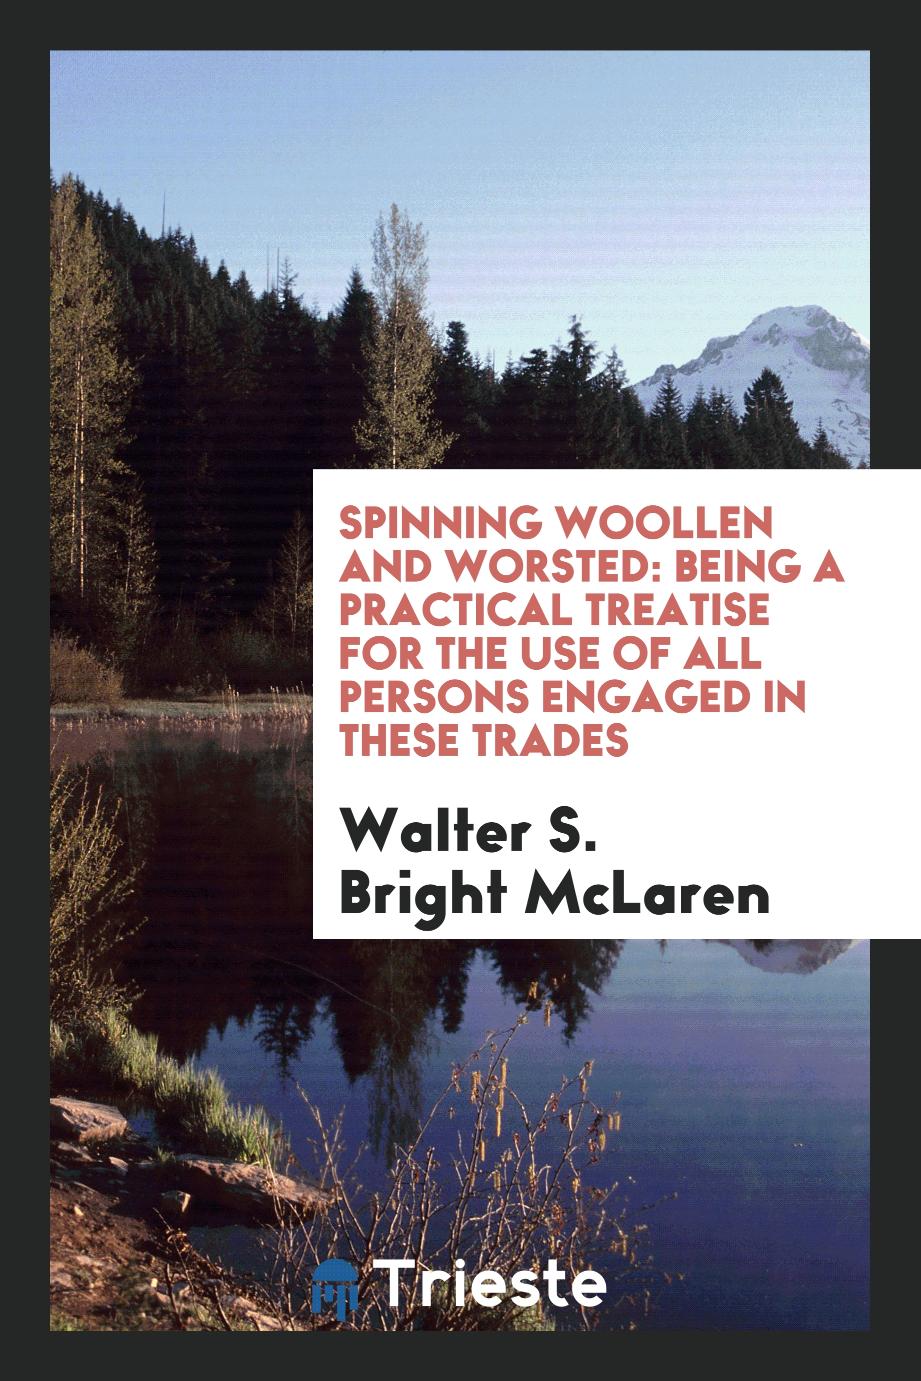 Spinning woollen and worsted: being a practical treatise for the use of all persons engaged in these trades